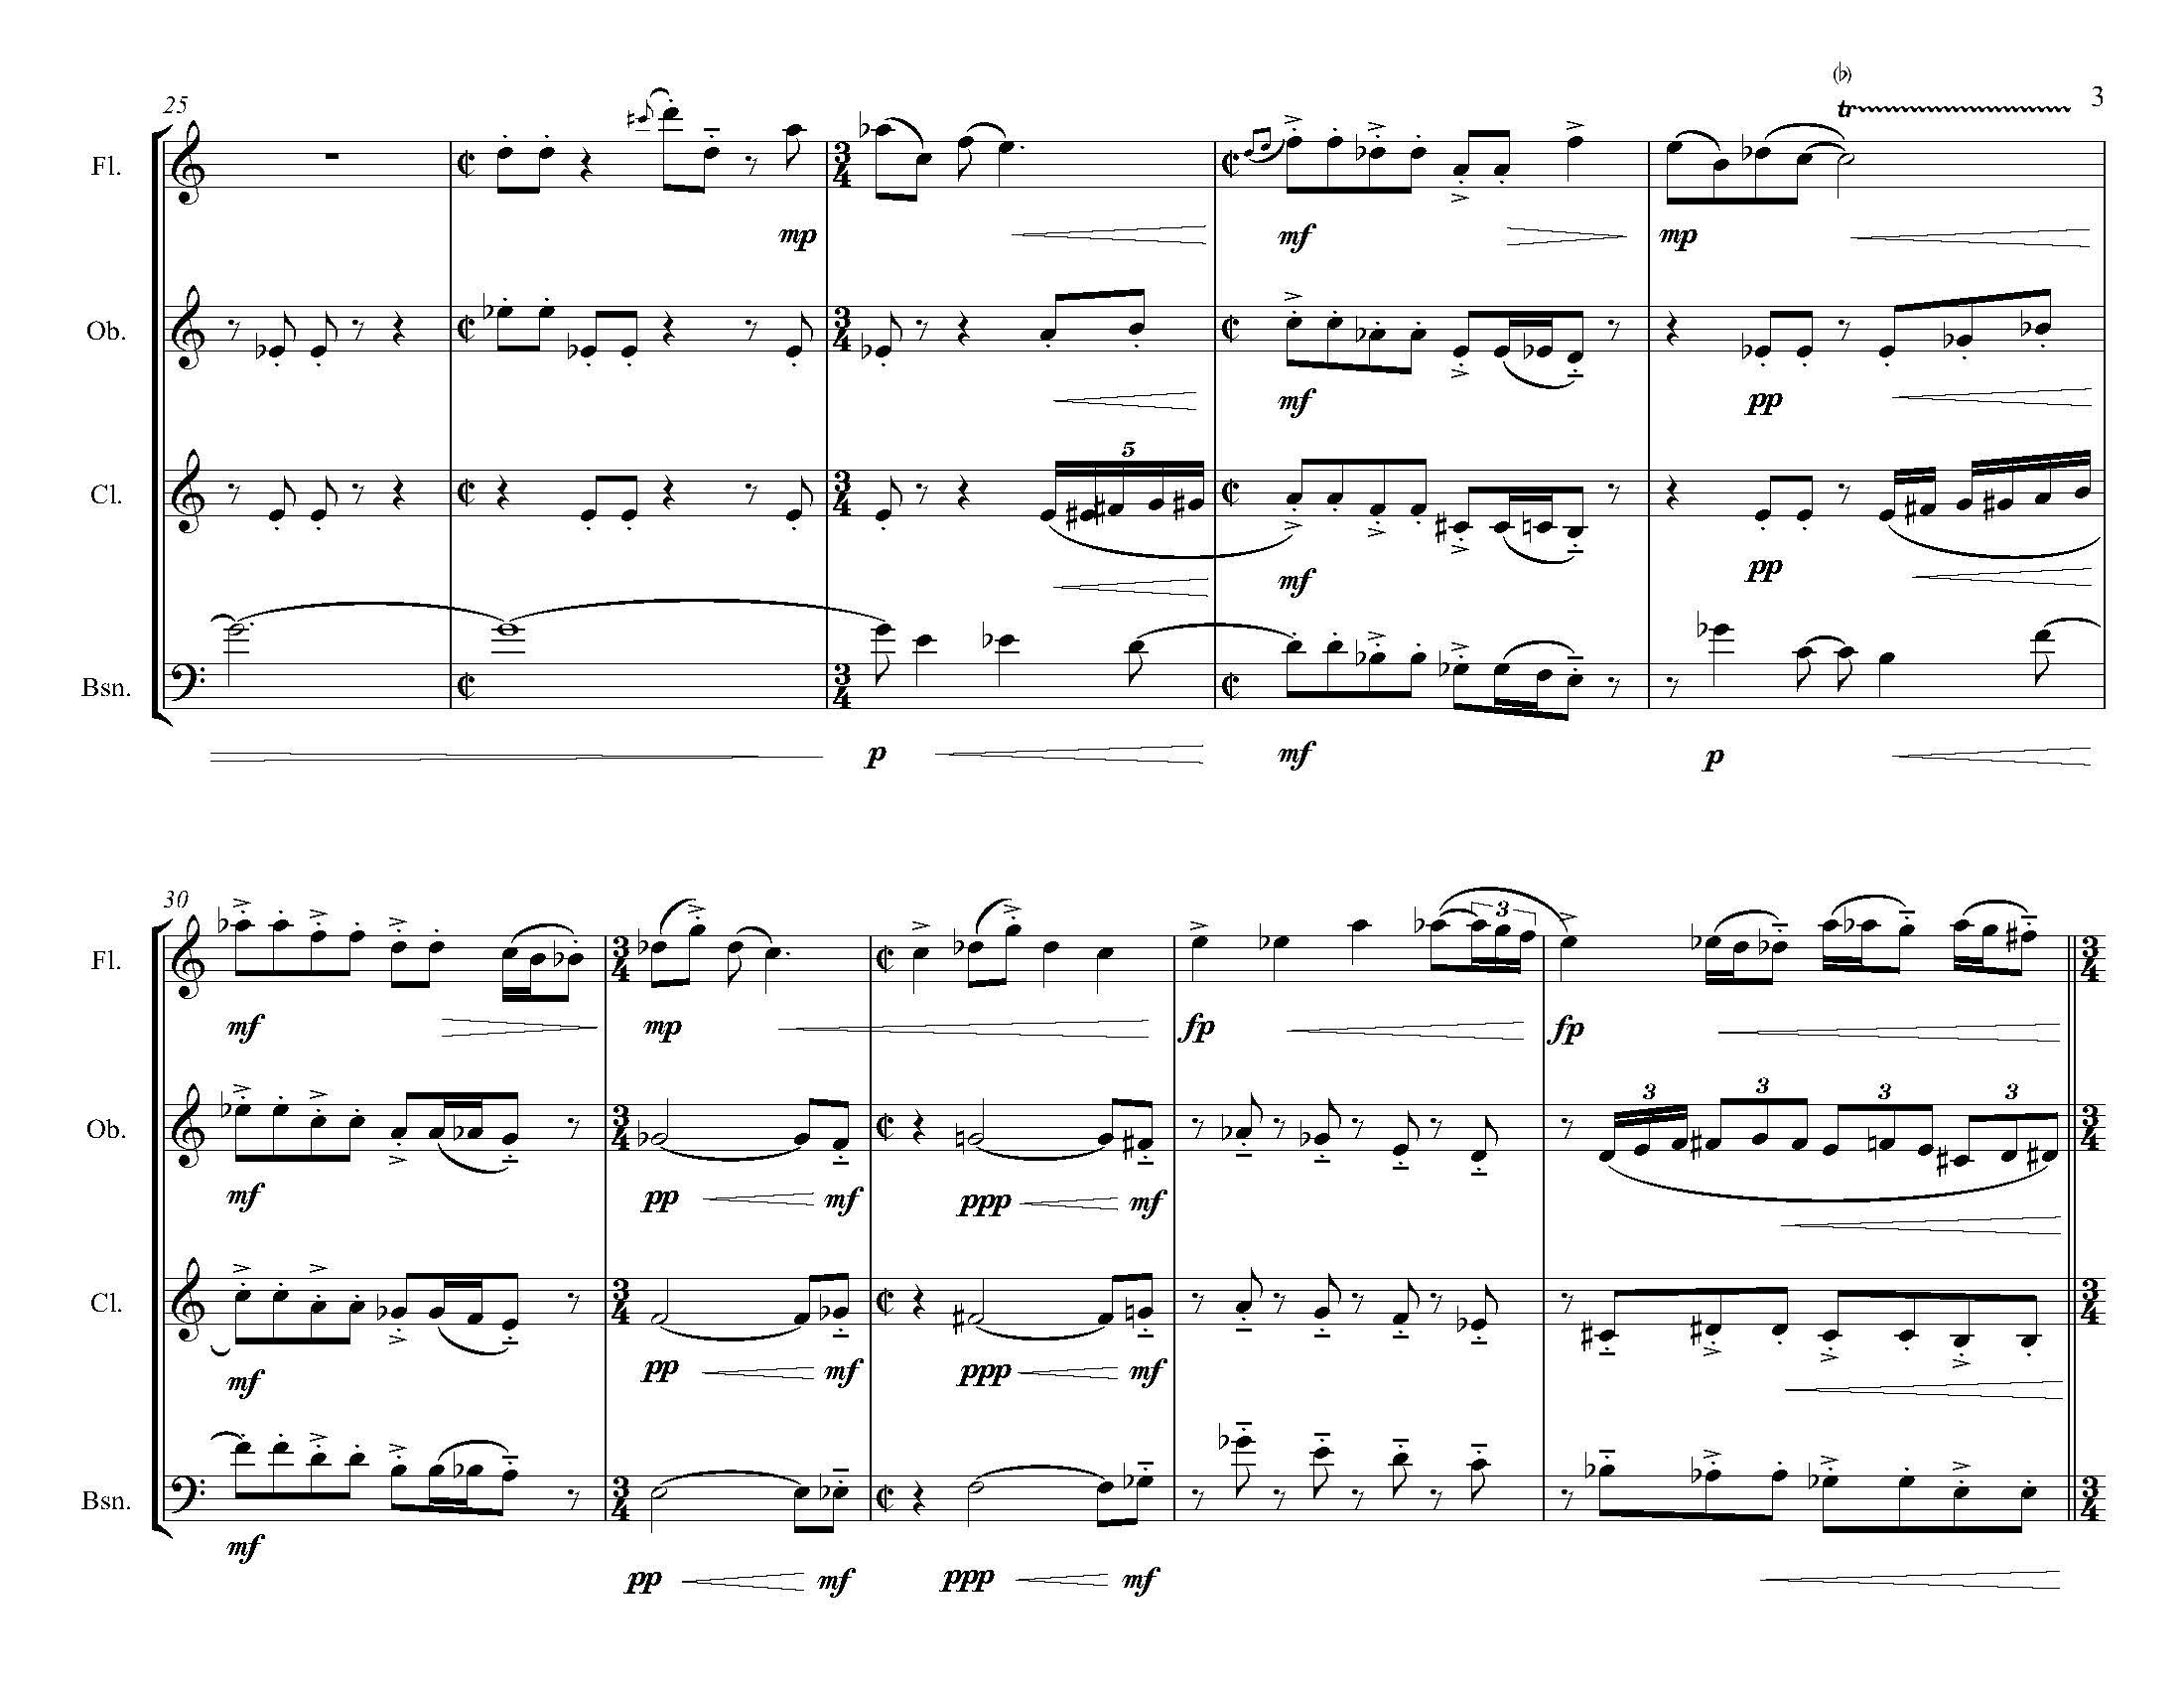 March the Twenty-Fifth - Complete Score_Page_09.jpg